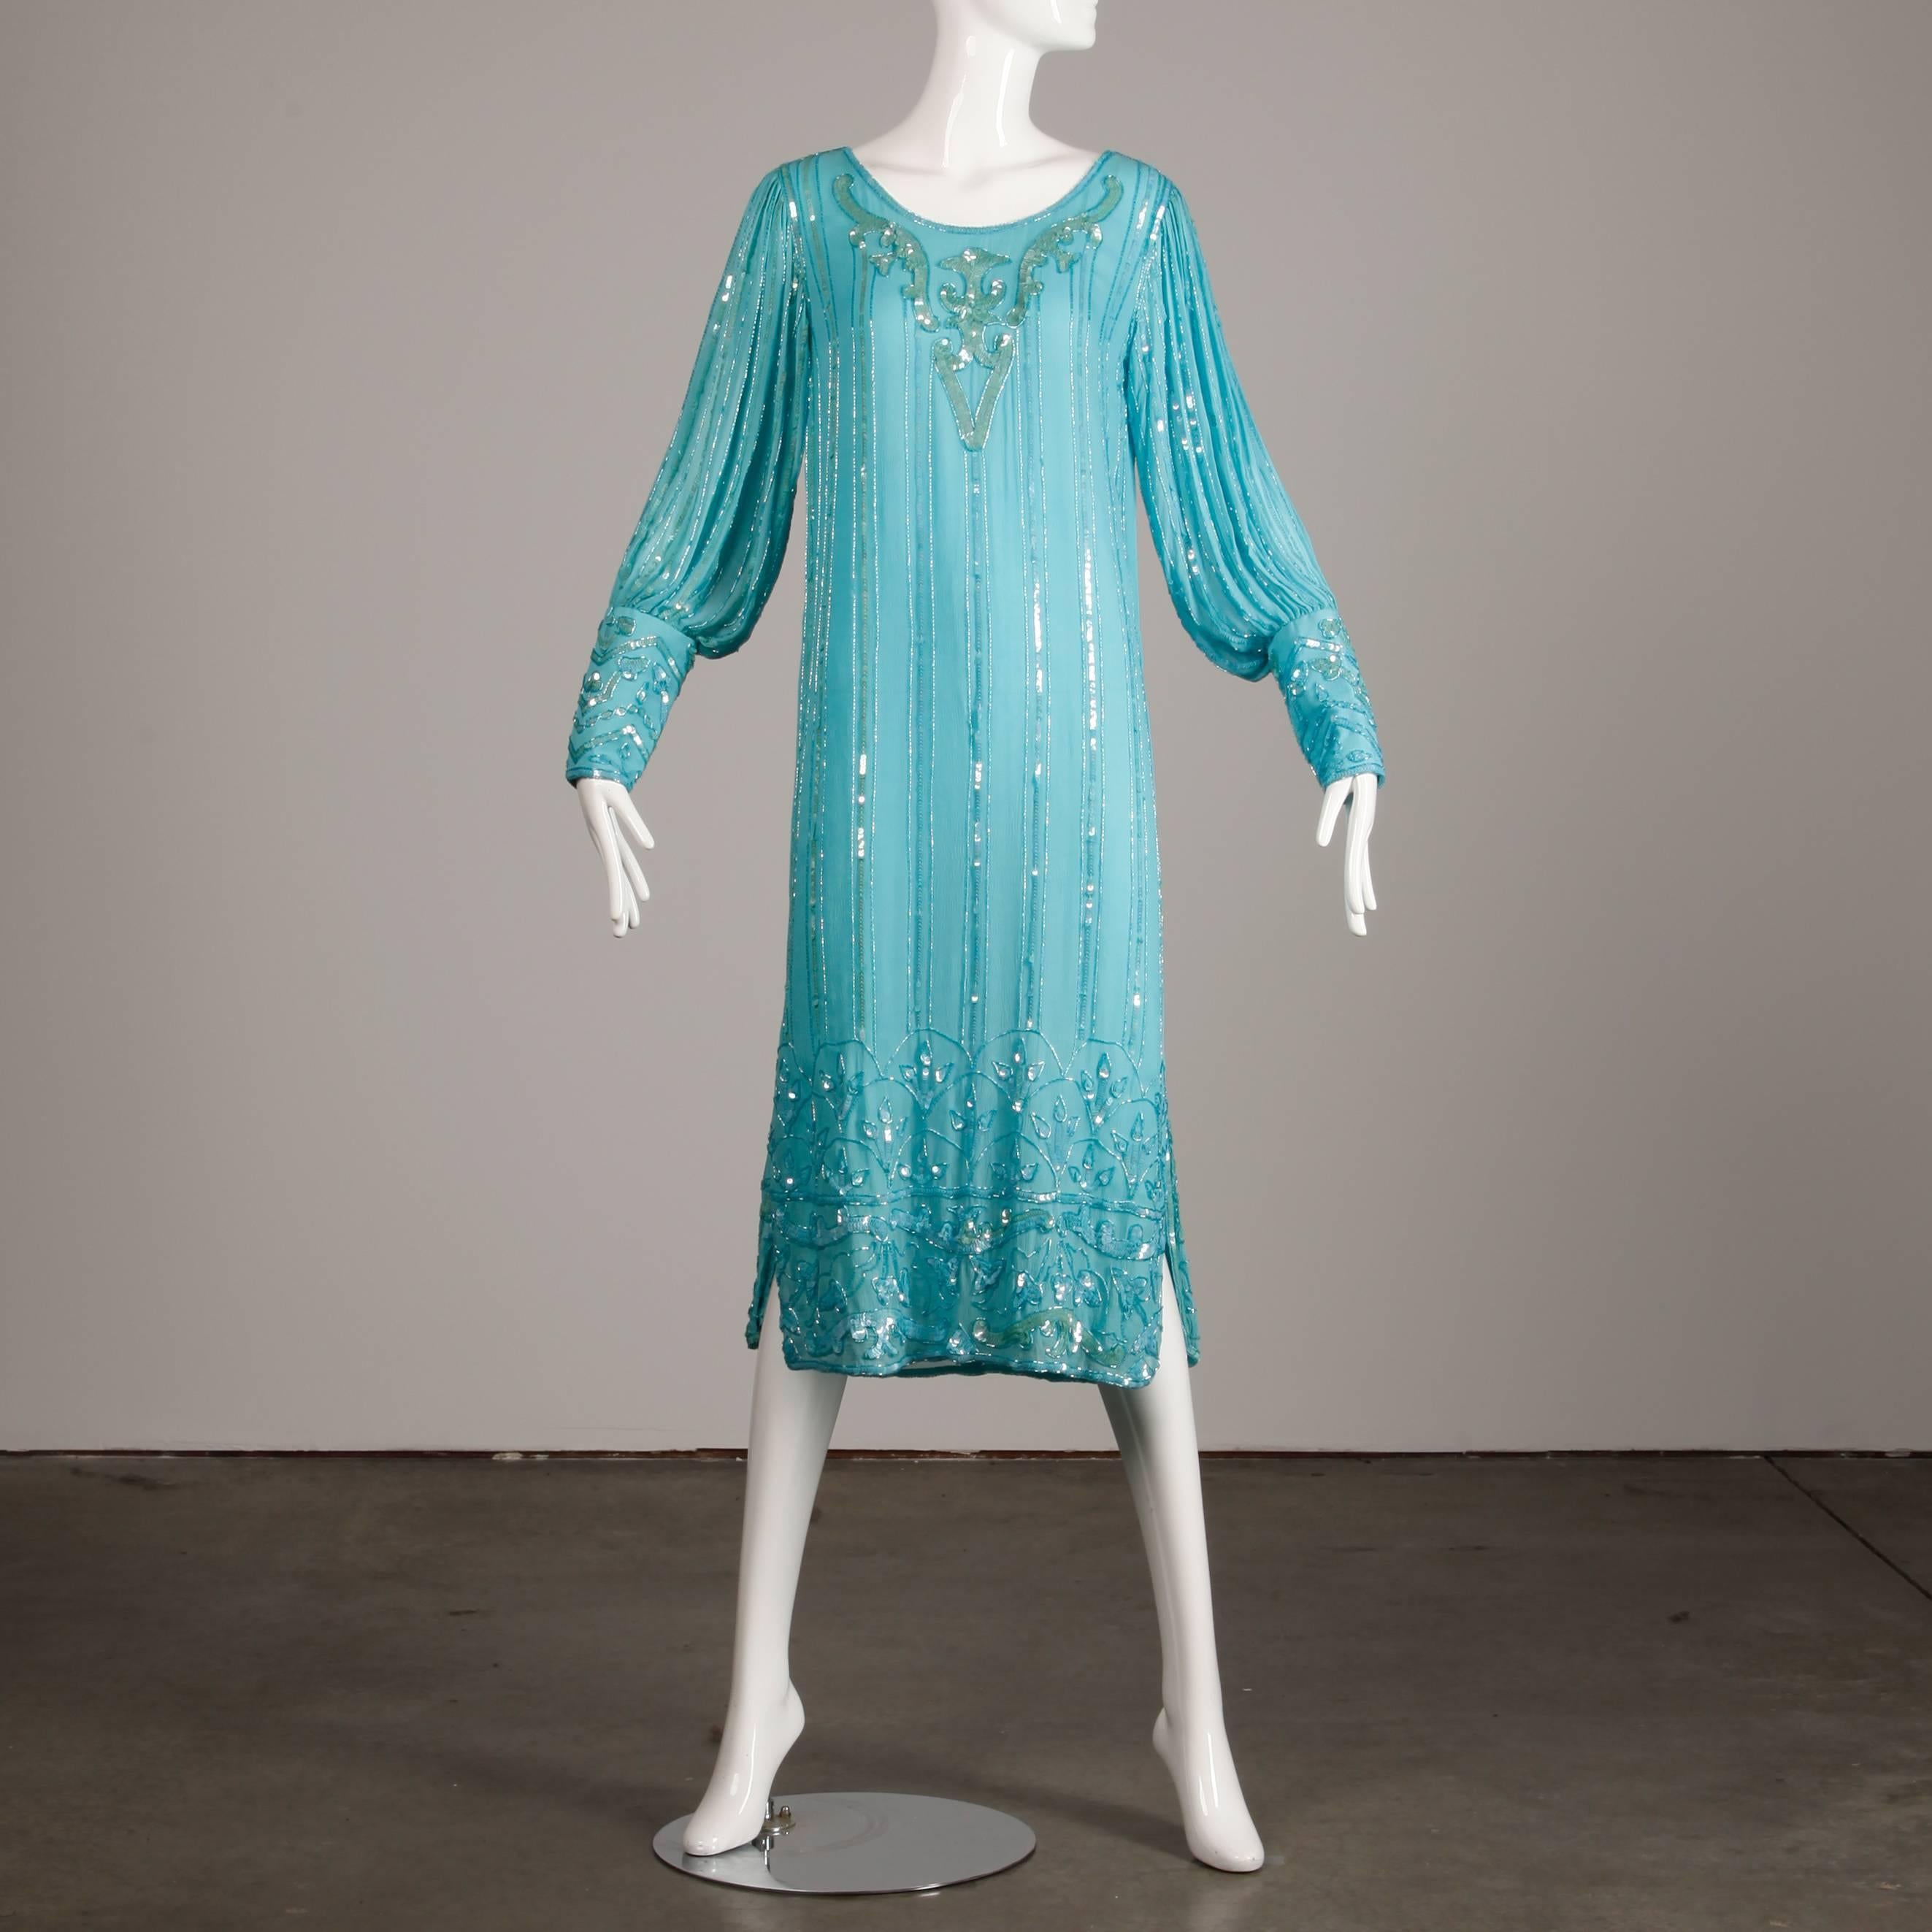 Vintage 1920s-inspired 1980s teal blue silk dress with hand done sequin and beadwork. Full blouson sleeves that zip at the cuff. Side slits. Fully lined in silk. The marked size is a medium, but the dress will also fit a modern size small. The bust